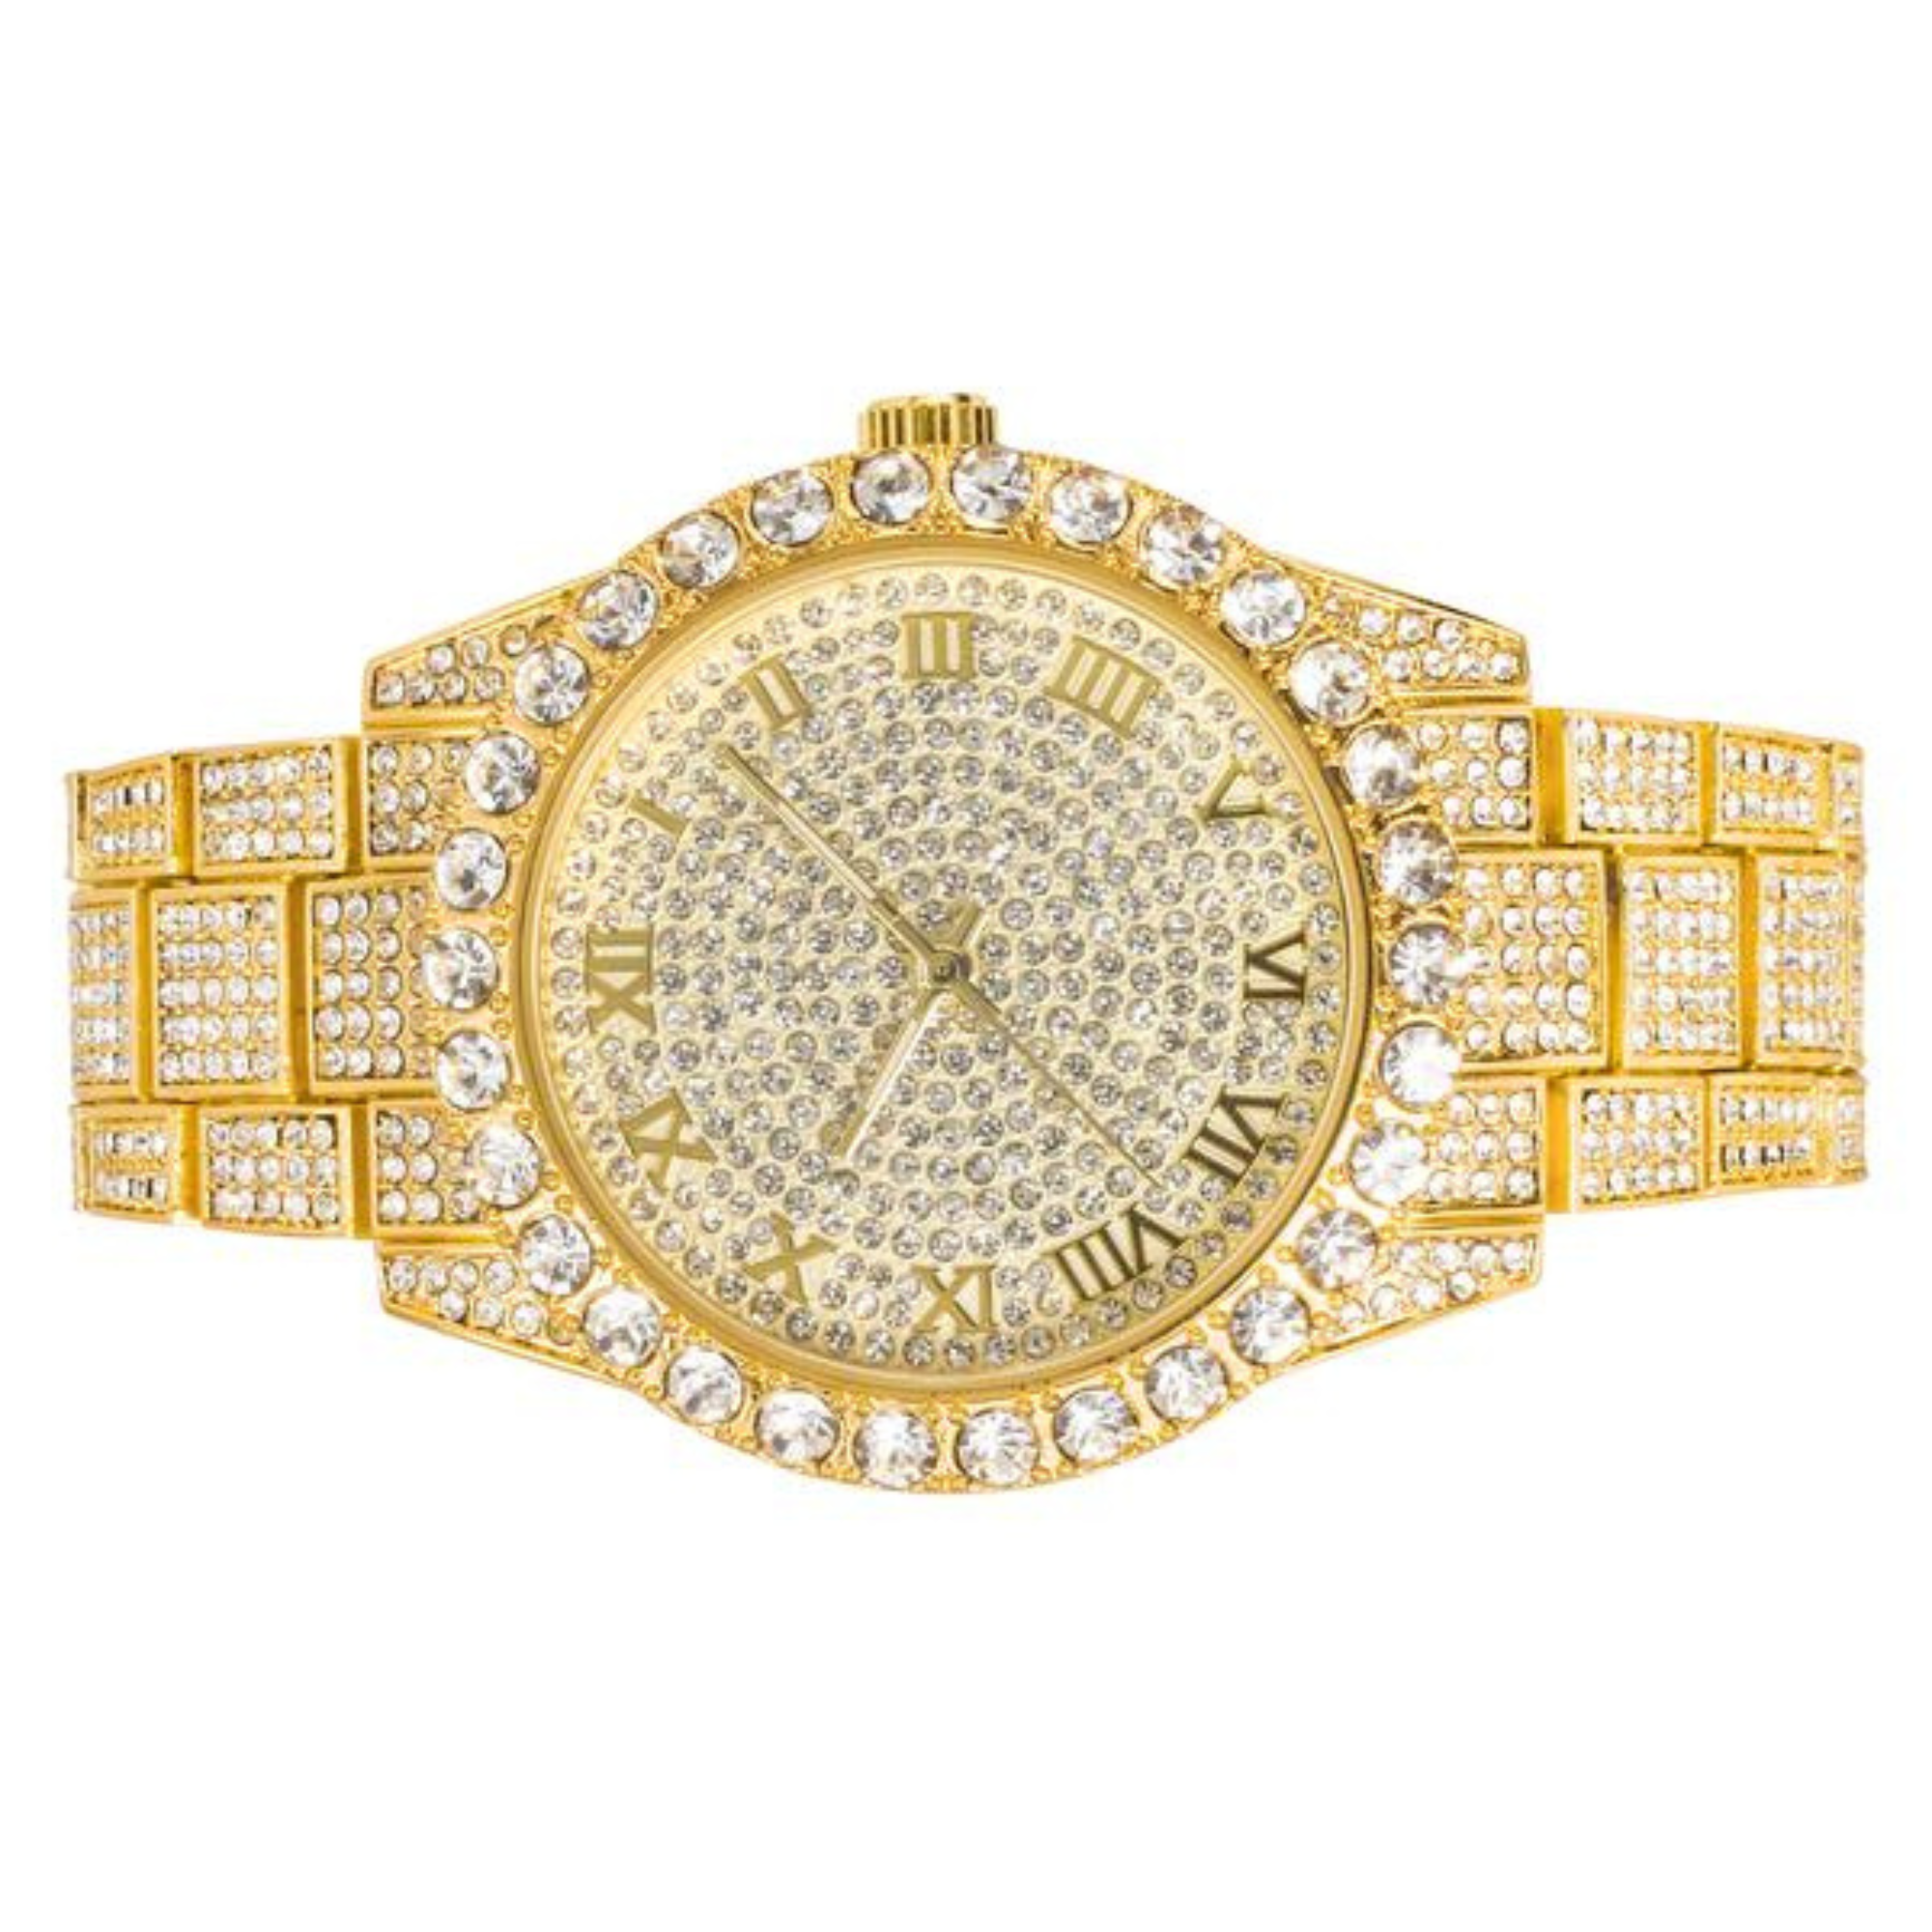 Men's Round Iced Out Watch 45mm Gold - Roman Dial